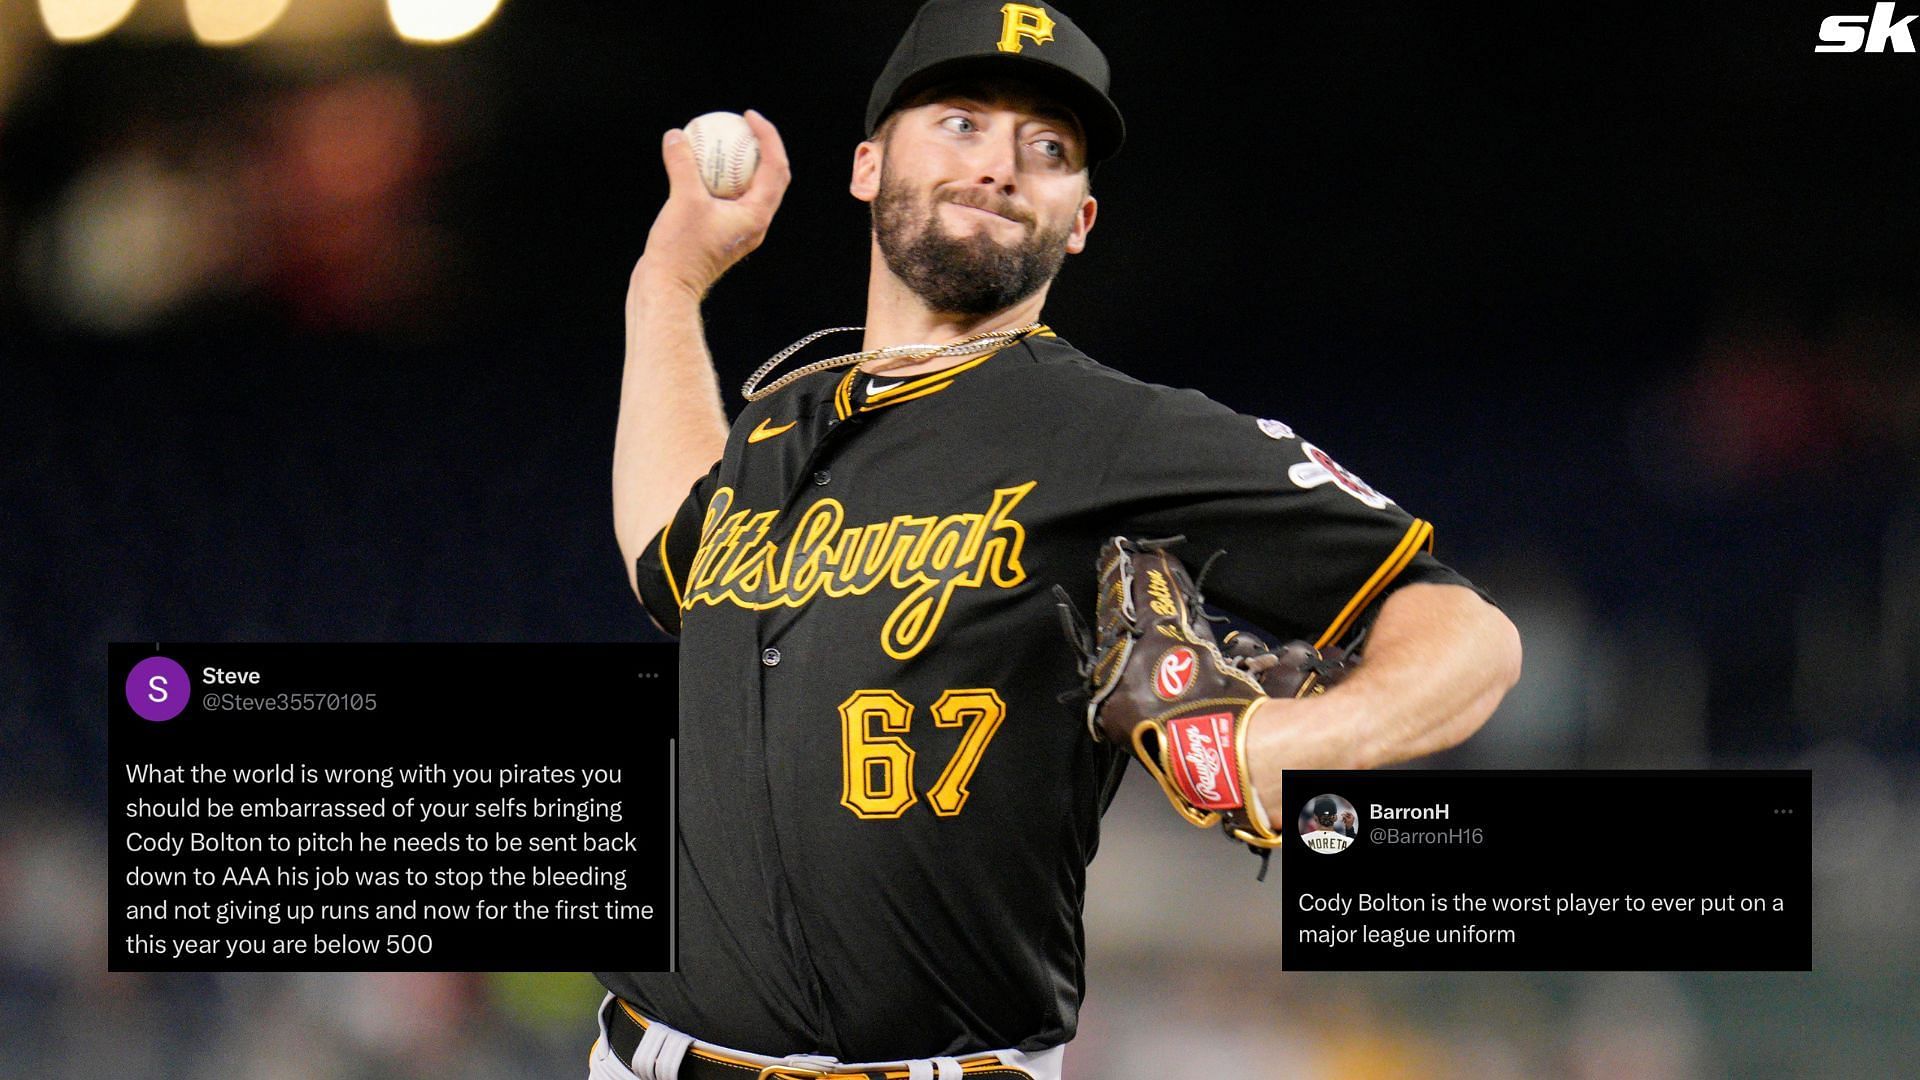 Cody Bolton of the Pittsburgh Pirates pitches against the Washington Nationals during his MLB debut